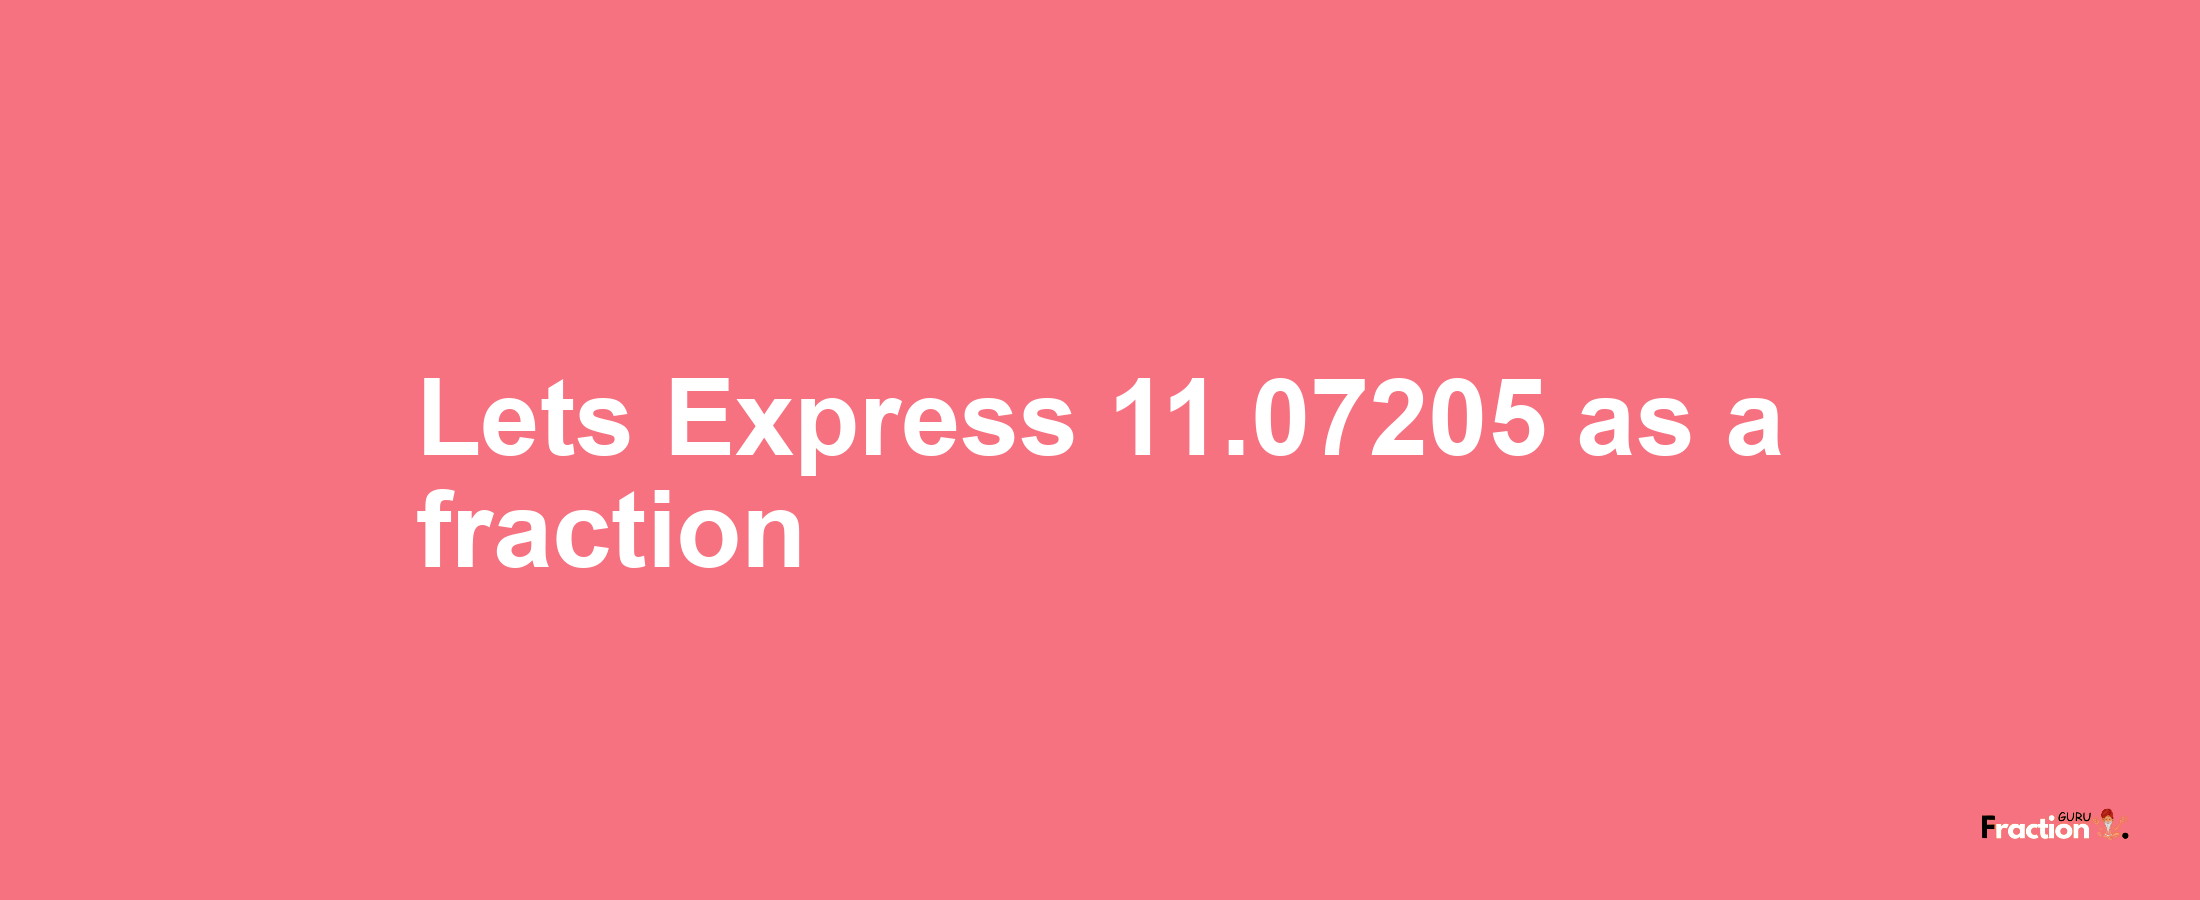 Lets Express 11.07205 as afraction